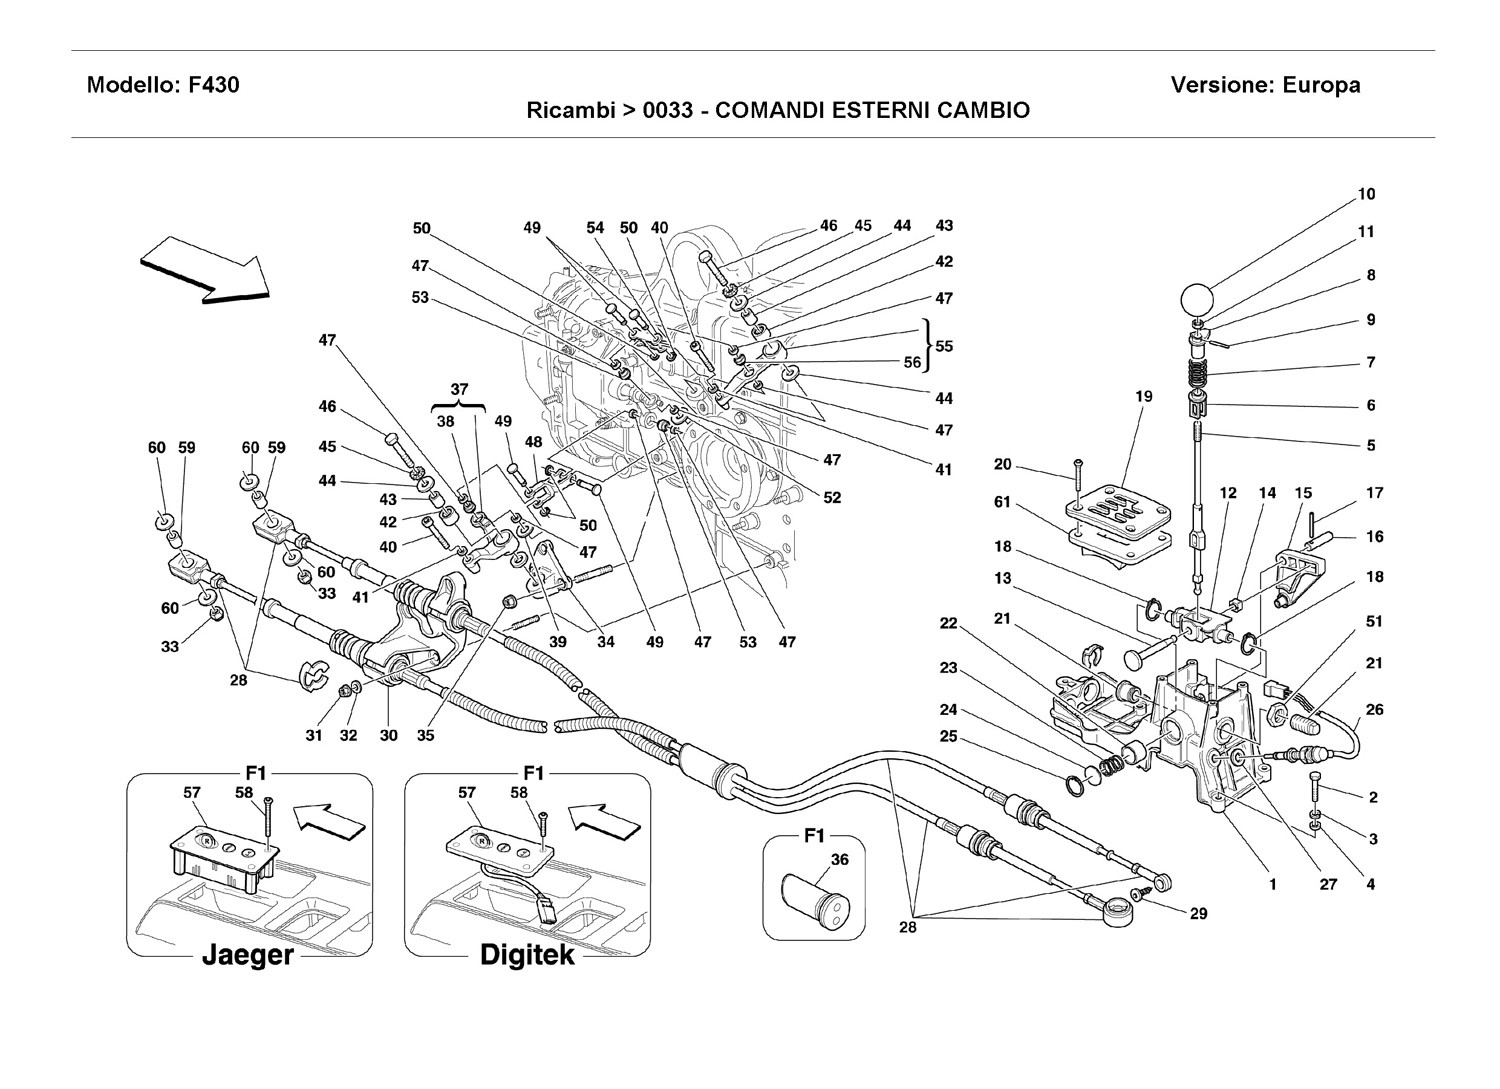 OUTSIDE GEARBOX CONTROLS